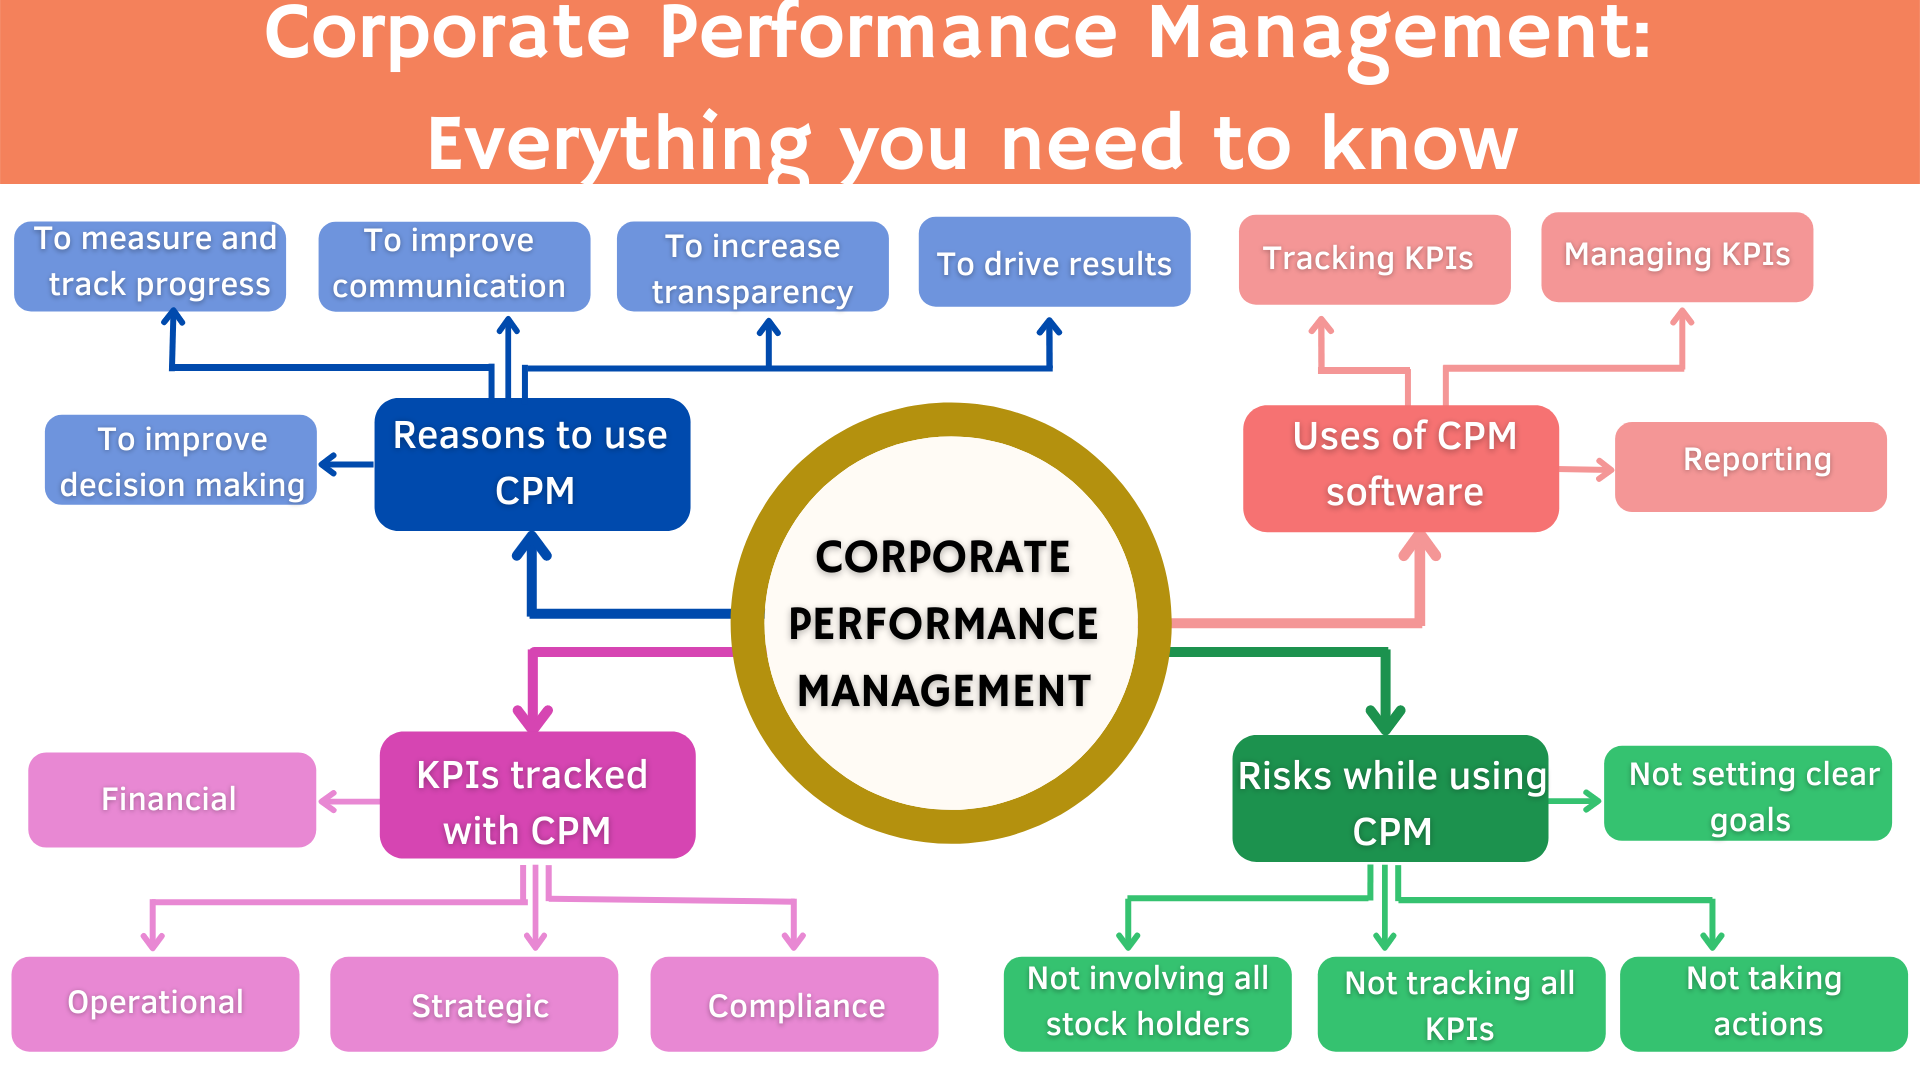 Software for Performance Management - SoftExpert CPM